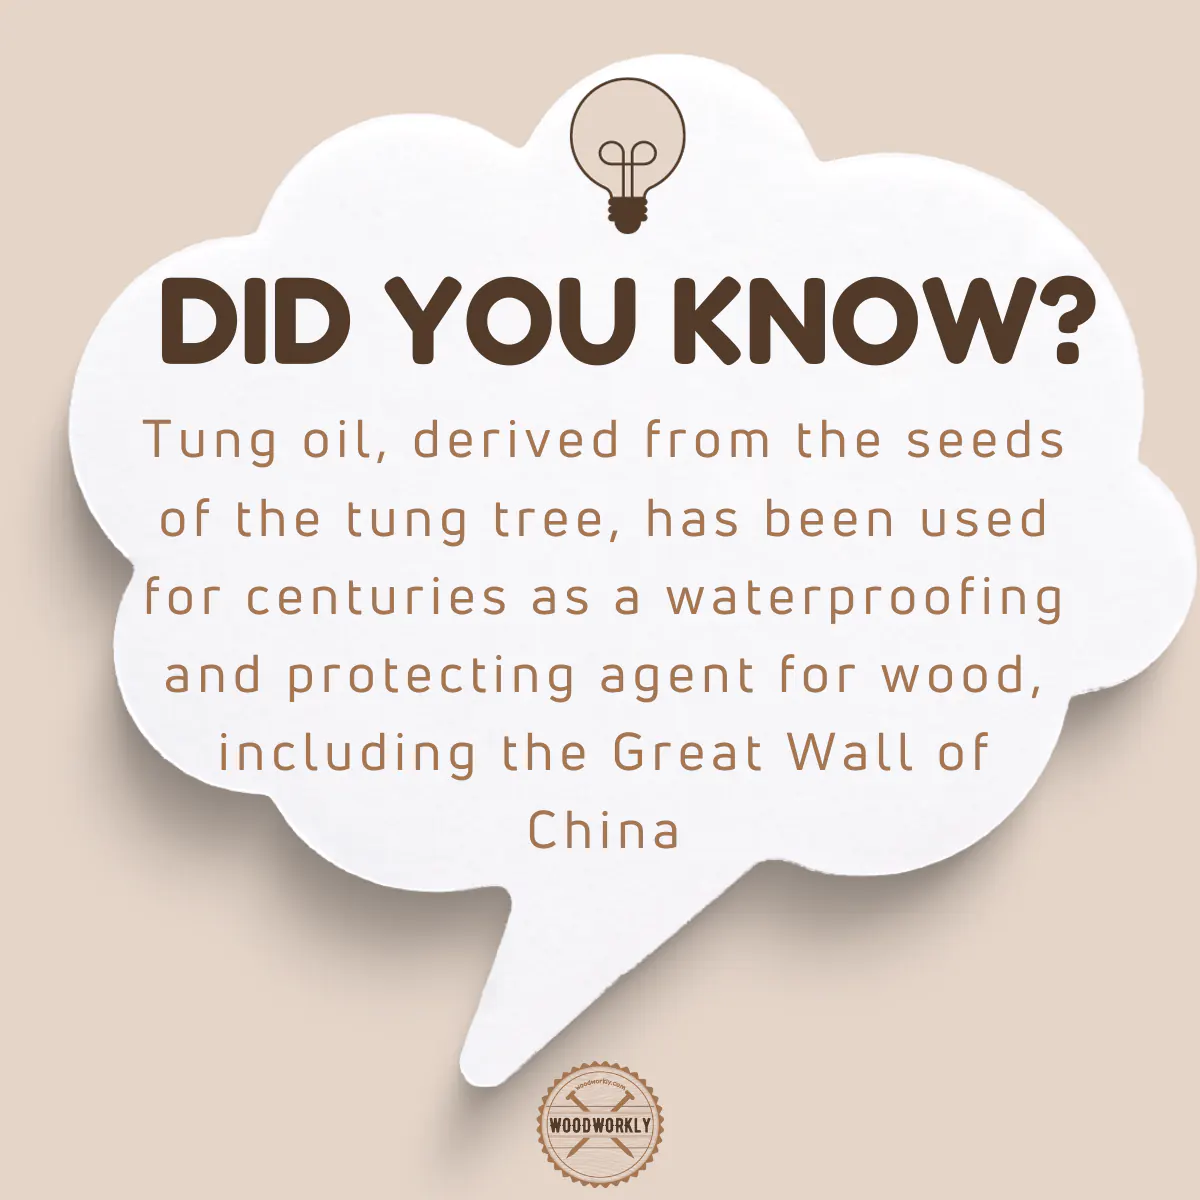 Did you know fact about tung oil